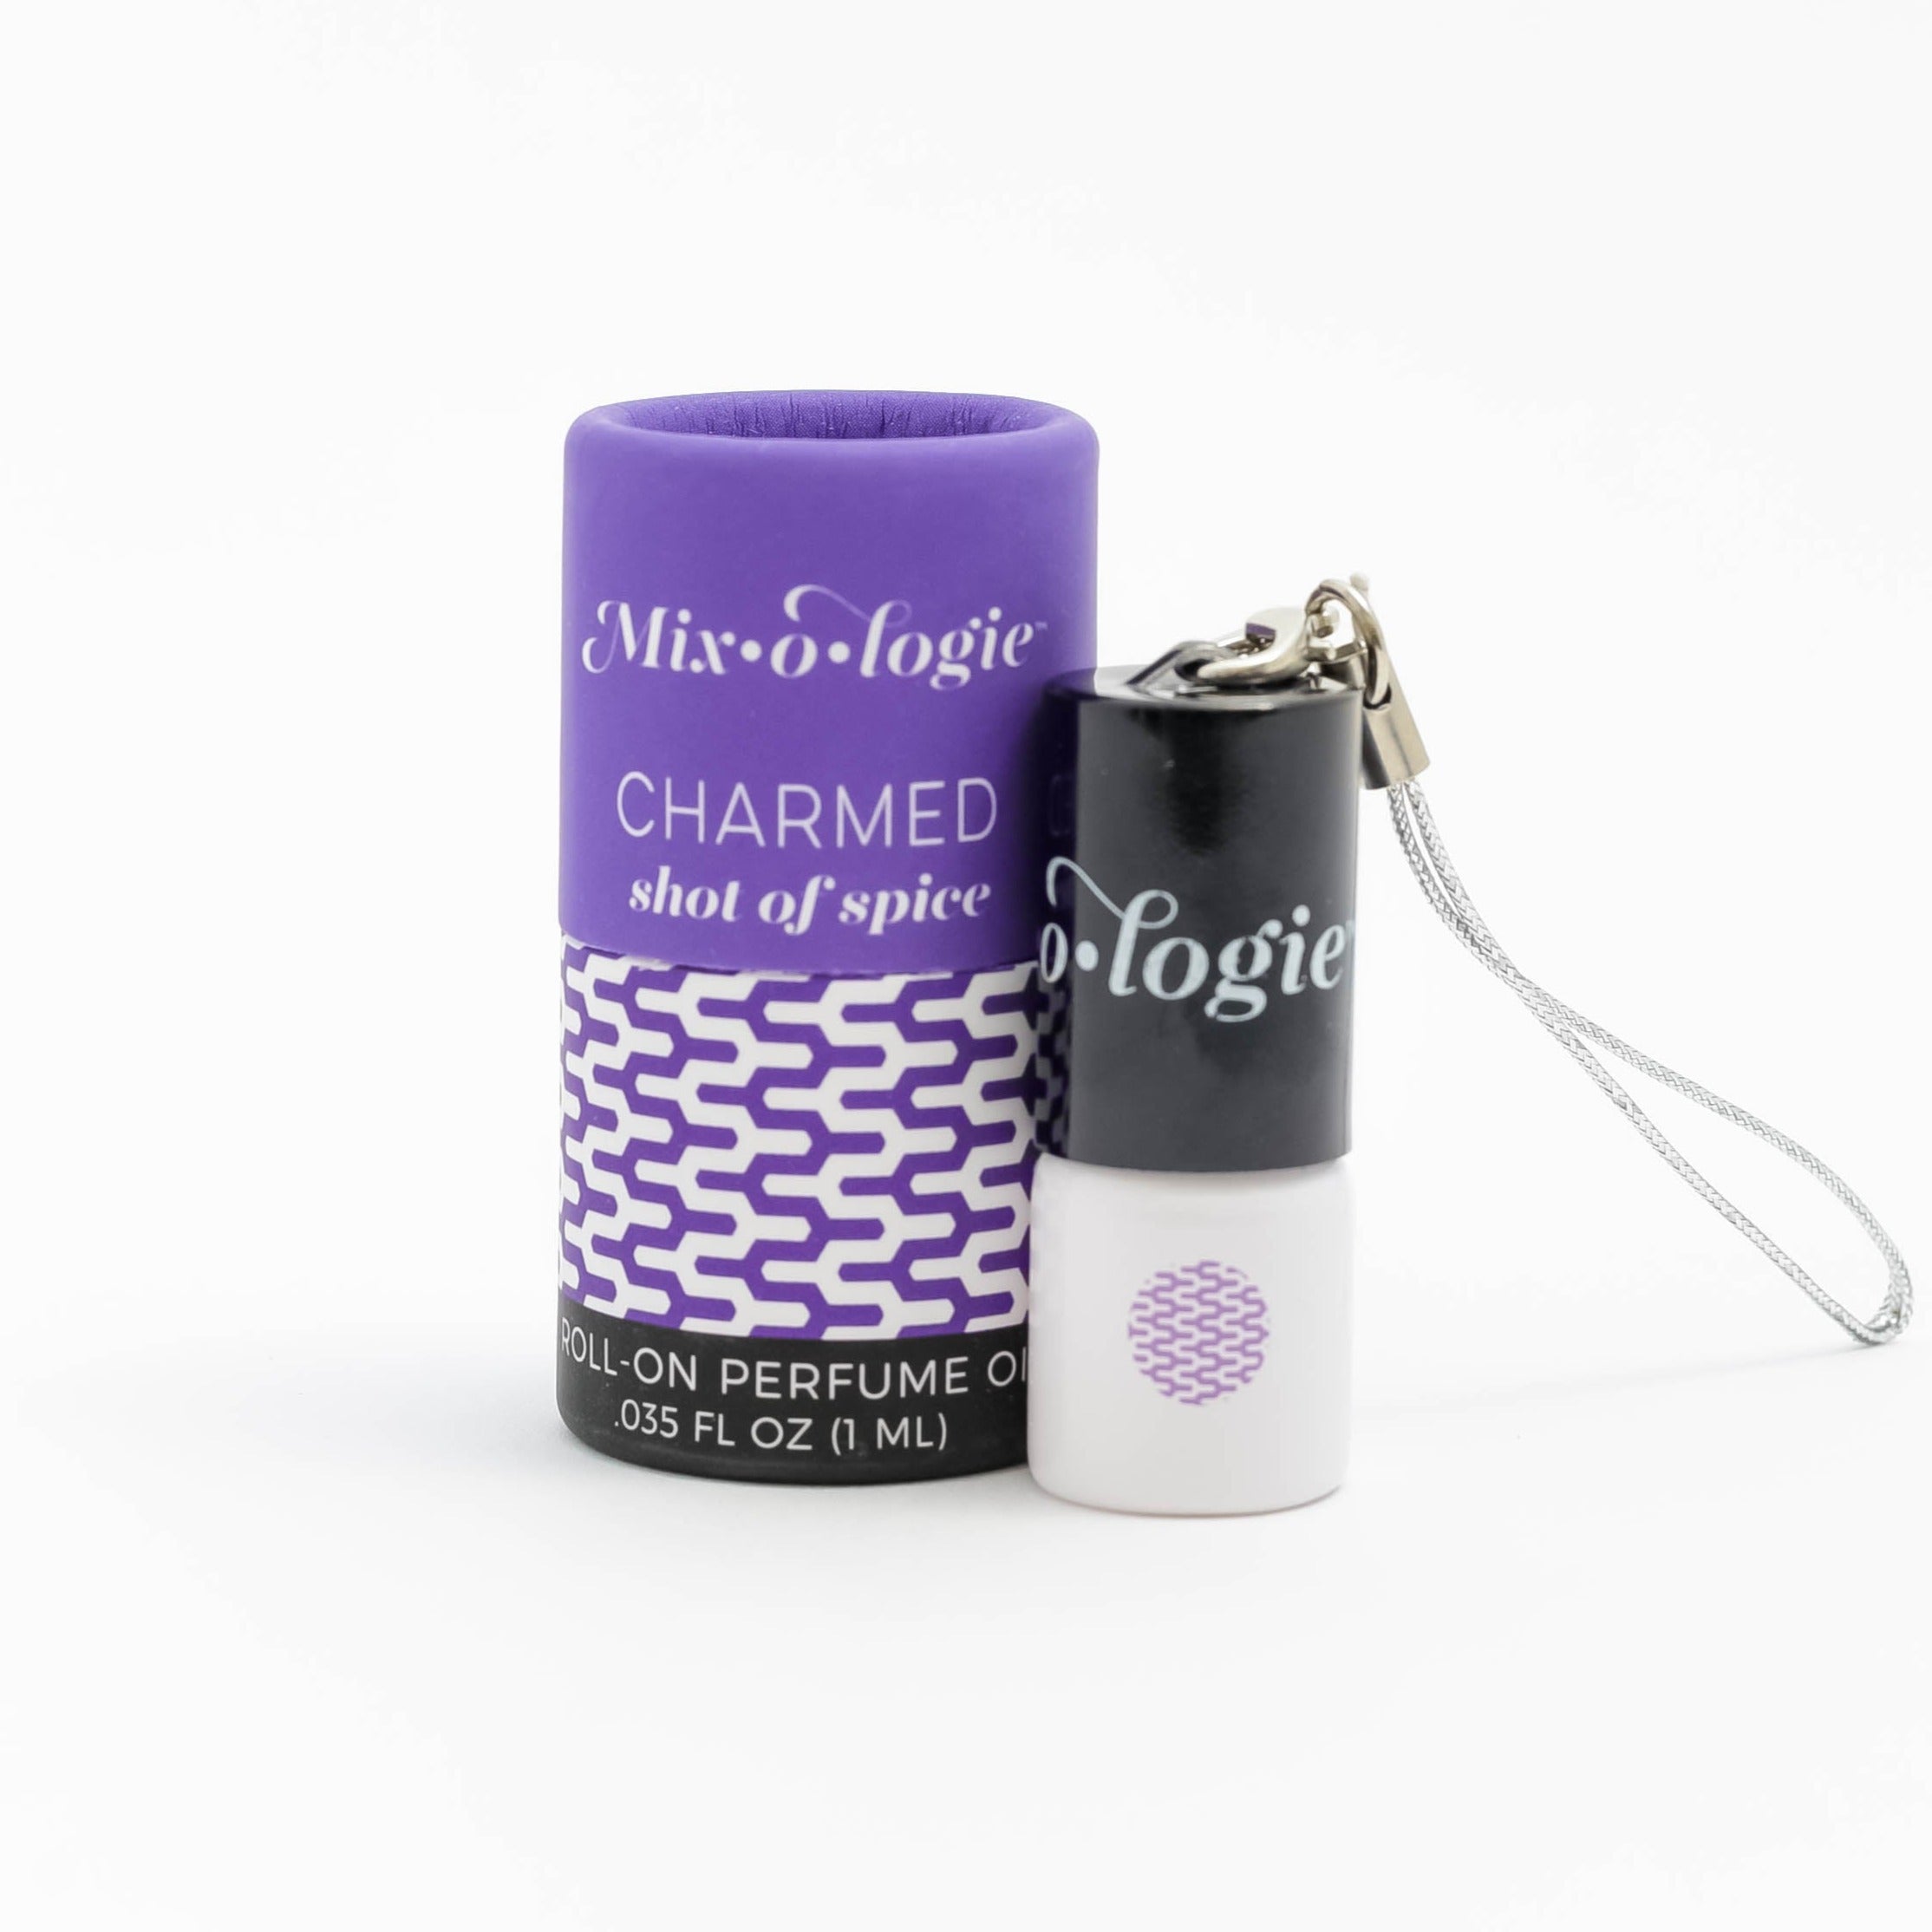 Charmed (Shot of Spice) mini white cylinder rollerballs with black top and keychain attachment with dark purple pattern has .035 fl oz or 1 mL. Dark purple cylinder packing tube with dark purple pattern. Roll-on perfume oil. Mini rollerball and cylinder tube are on a white background